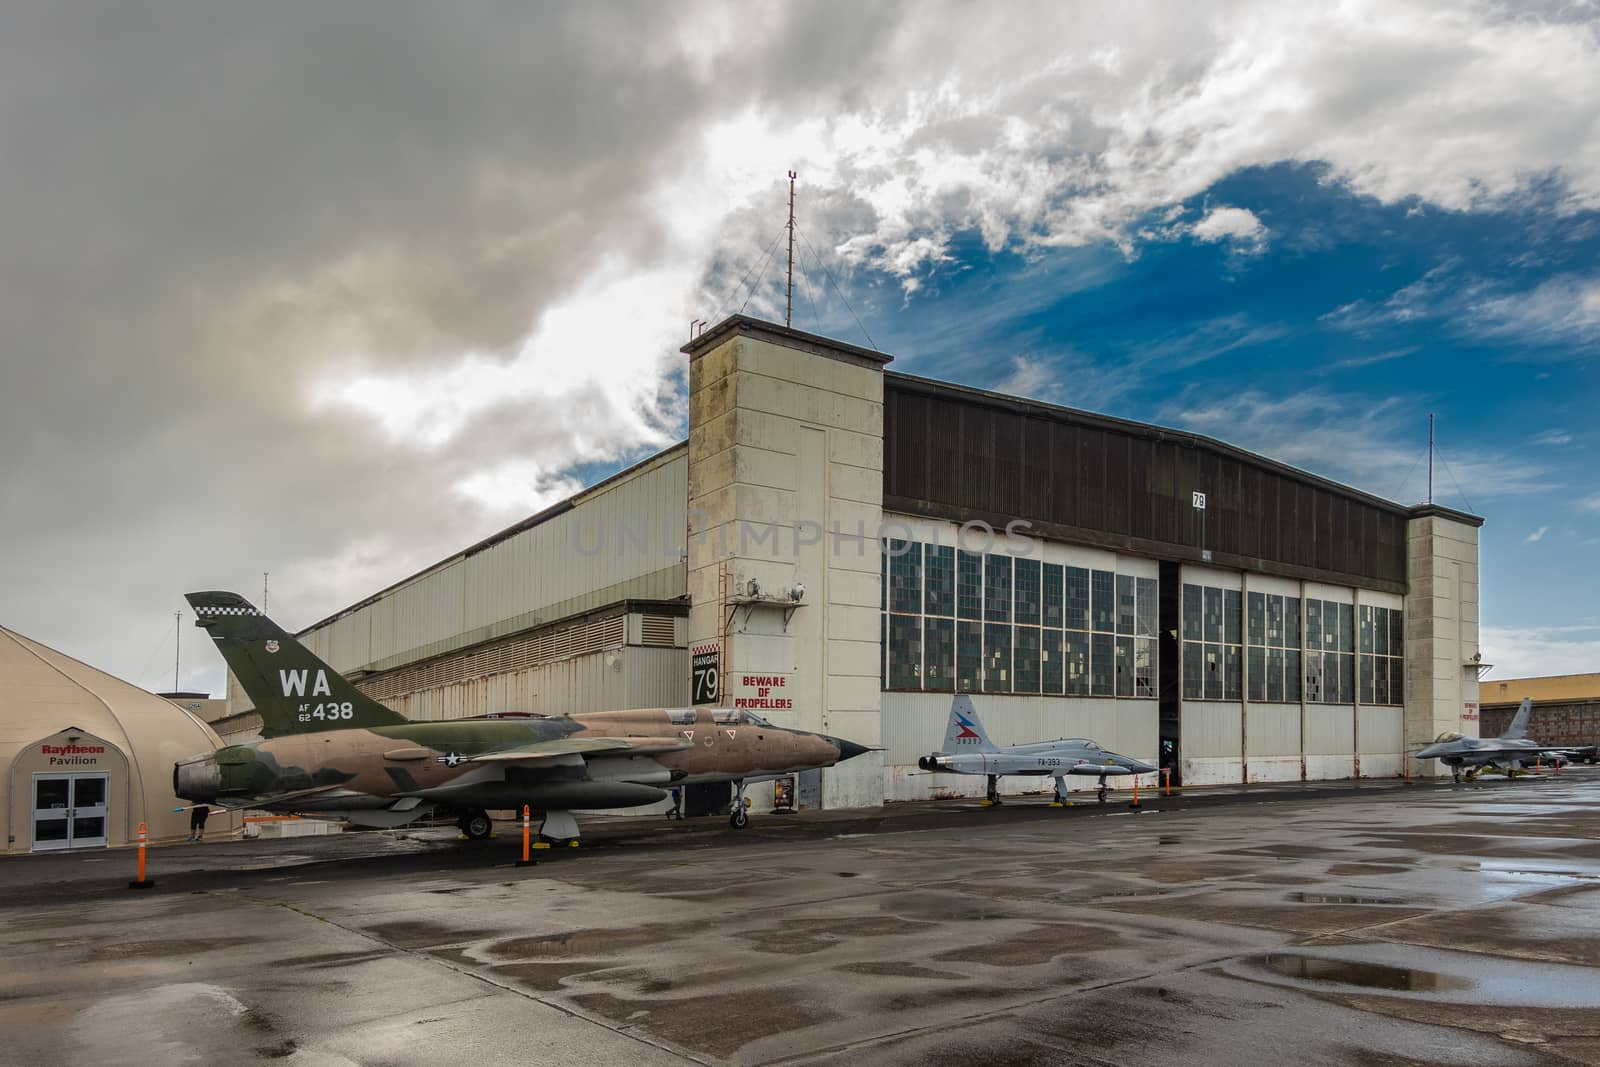 Oahu, Hawaii, USA. - January 10, 2020: Pearl Harbor Aviation Museum. 3 fighter jets outside hangar 79 on wet tarmac under rainy sky with blue patch. Raytheon pavillion nearby.